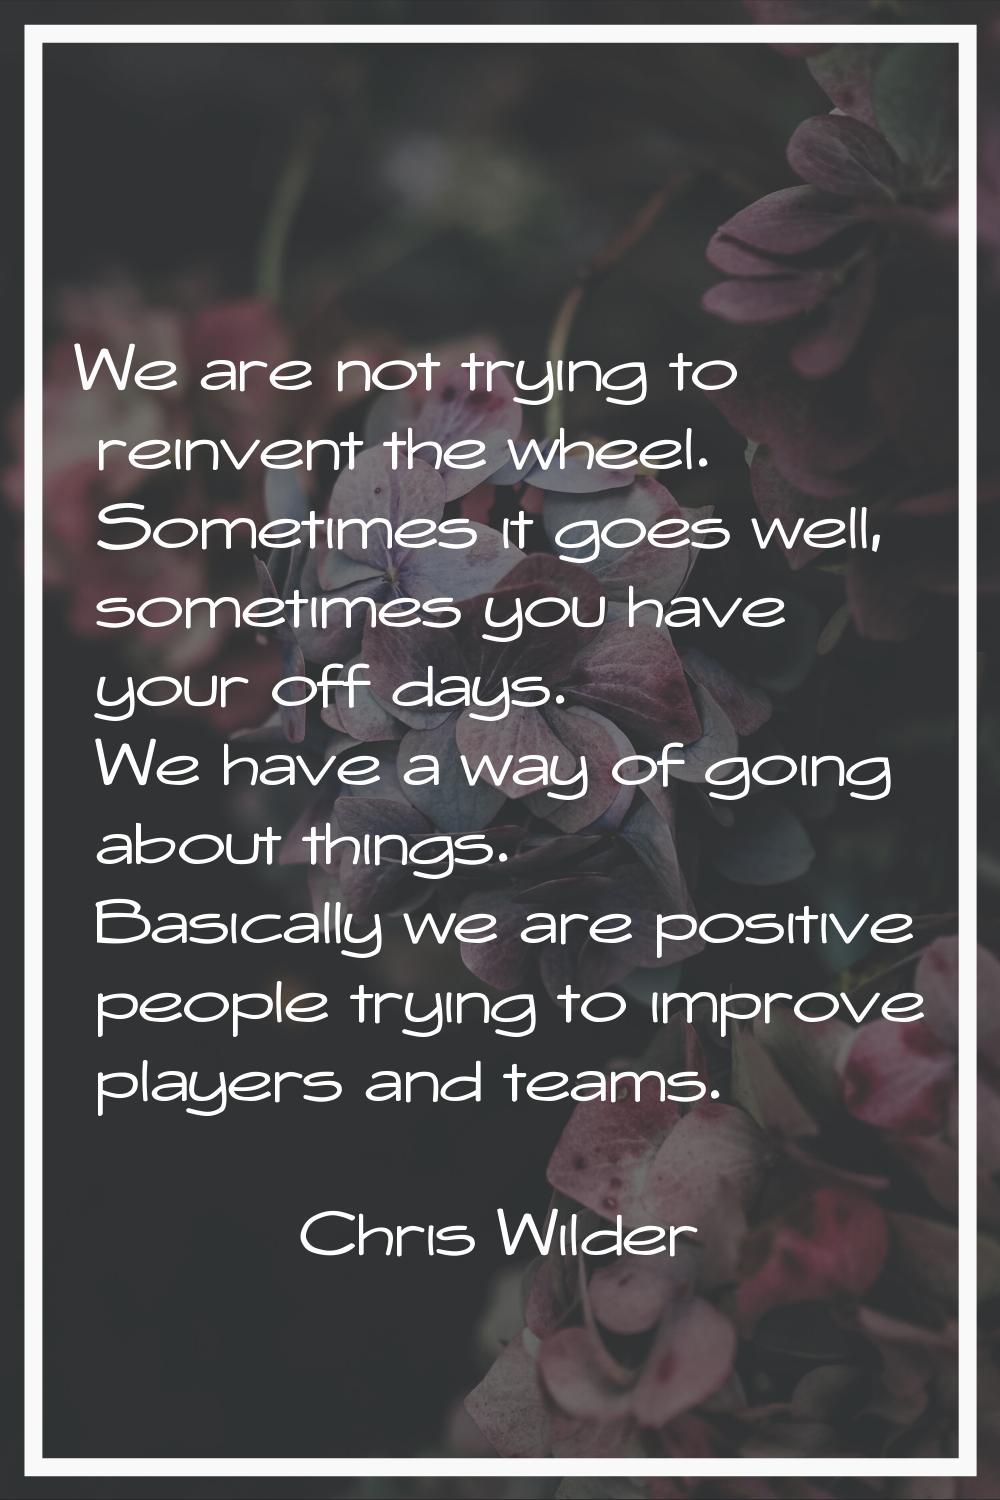 We are not trying to reinvent the wheel. Sometimes it goes well, sometimes you have your off days. 